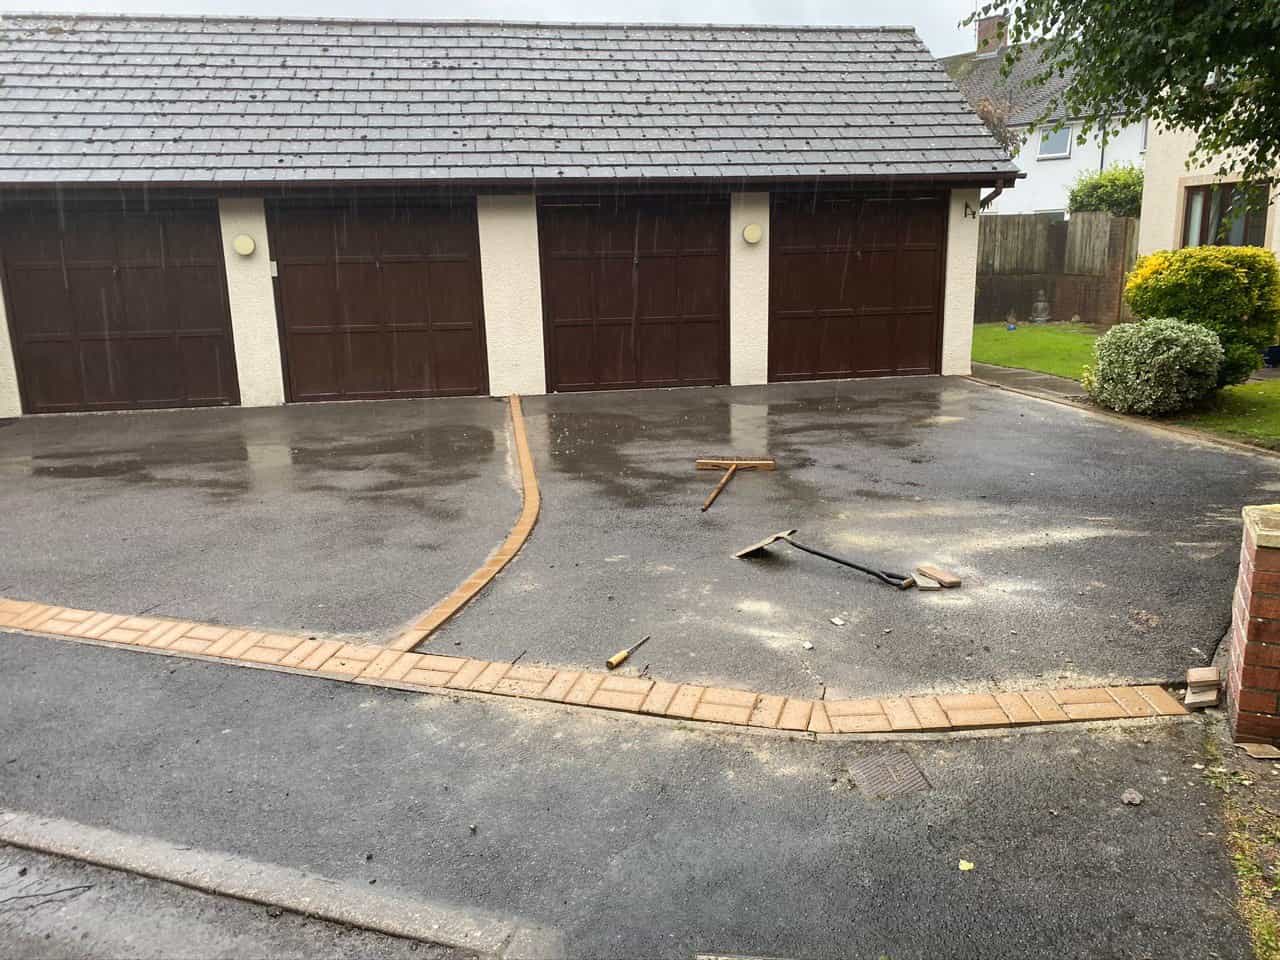 This is a photo of a resin driveway installed in Birmingham by Birmingham Resin Driveways